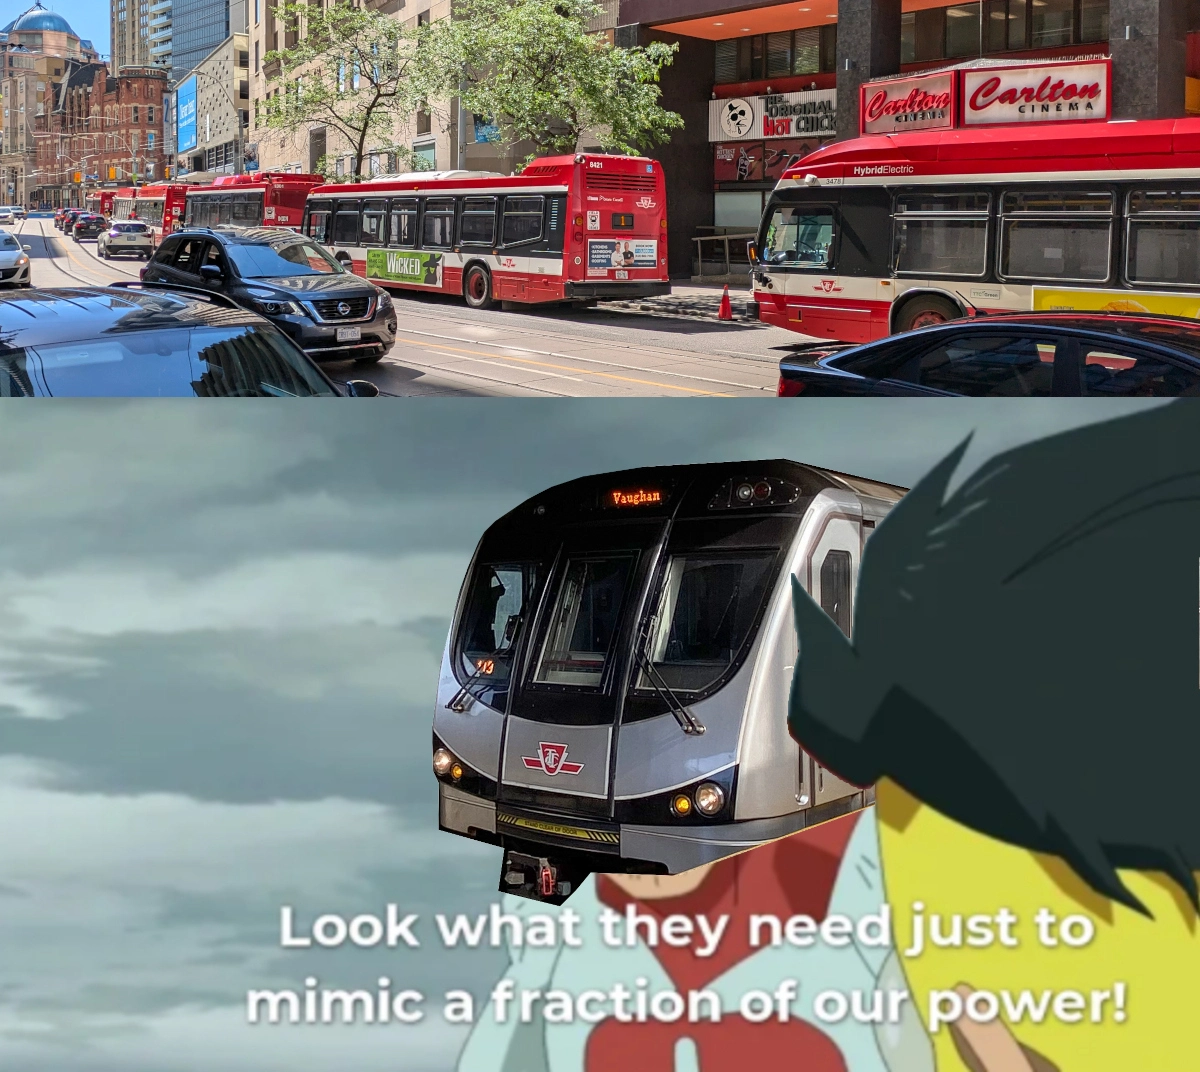 A meme. Panel 1 has an image with 5 red TTC busses back-to-back. The route number on the back indicates 1. Panel 2 has a Toronto Rocket subway train with the caption "Look what they need just to mimic a fraction of our power!"